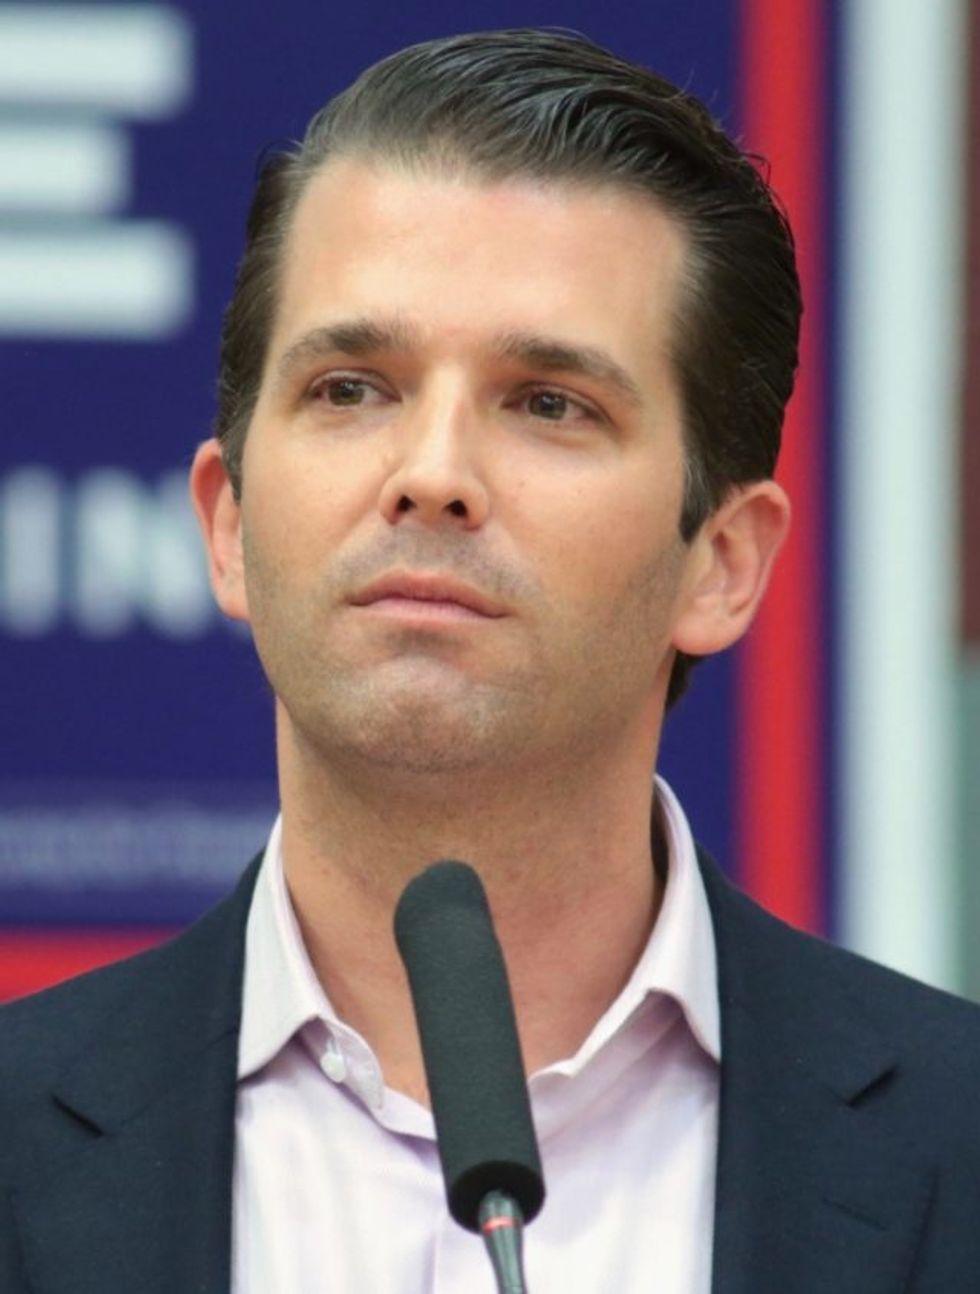 Don Jr. Received Shares From Investor Seeking Government Support